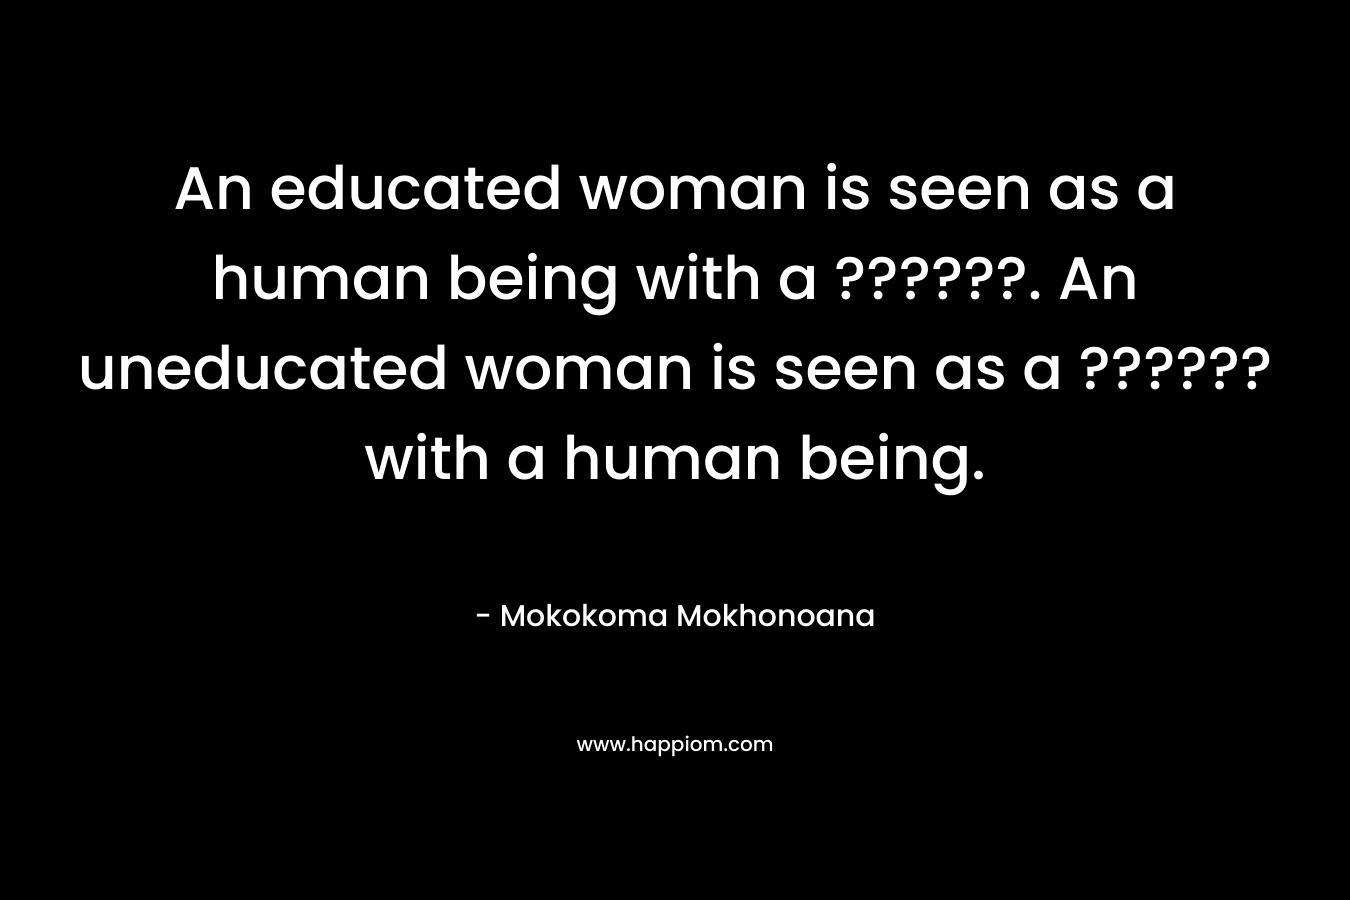 An educated woman is seen as a human being with a ??????. An uneducated woman is seen as a ?????? with a human being.